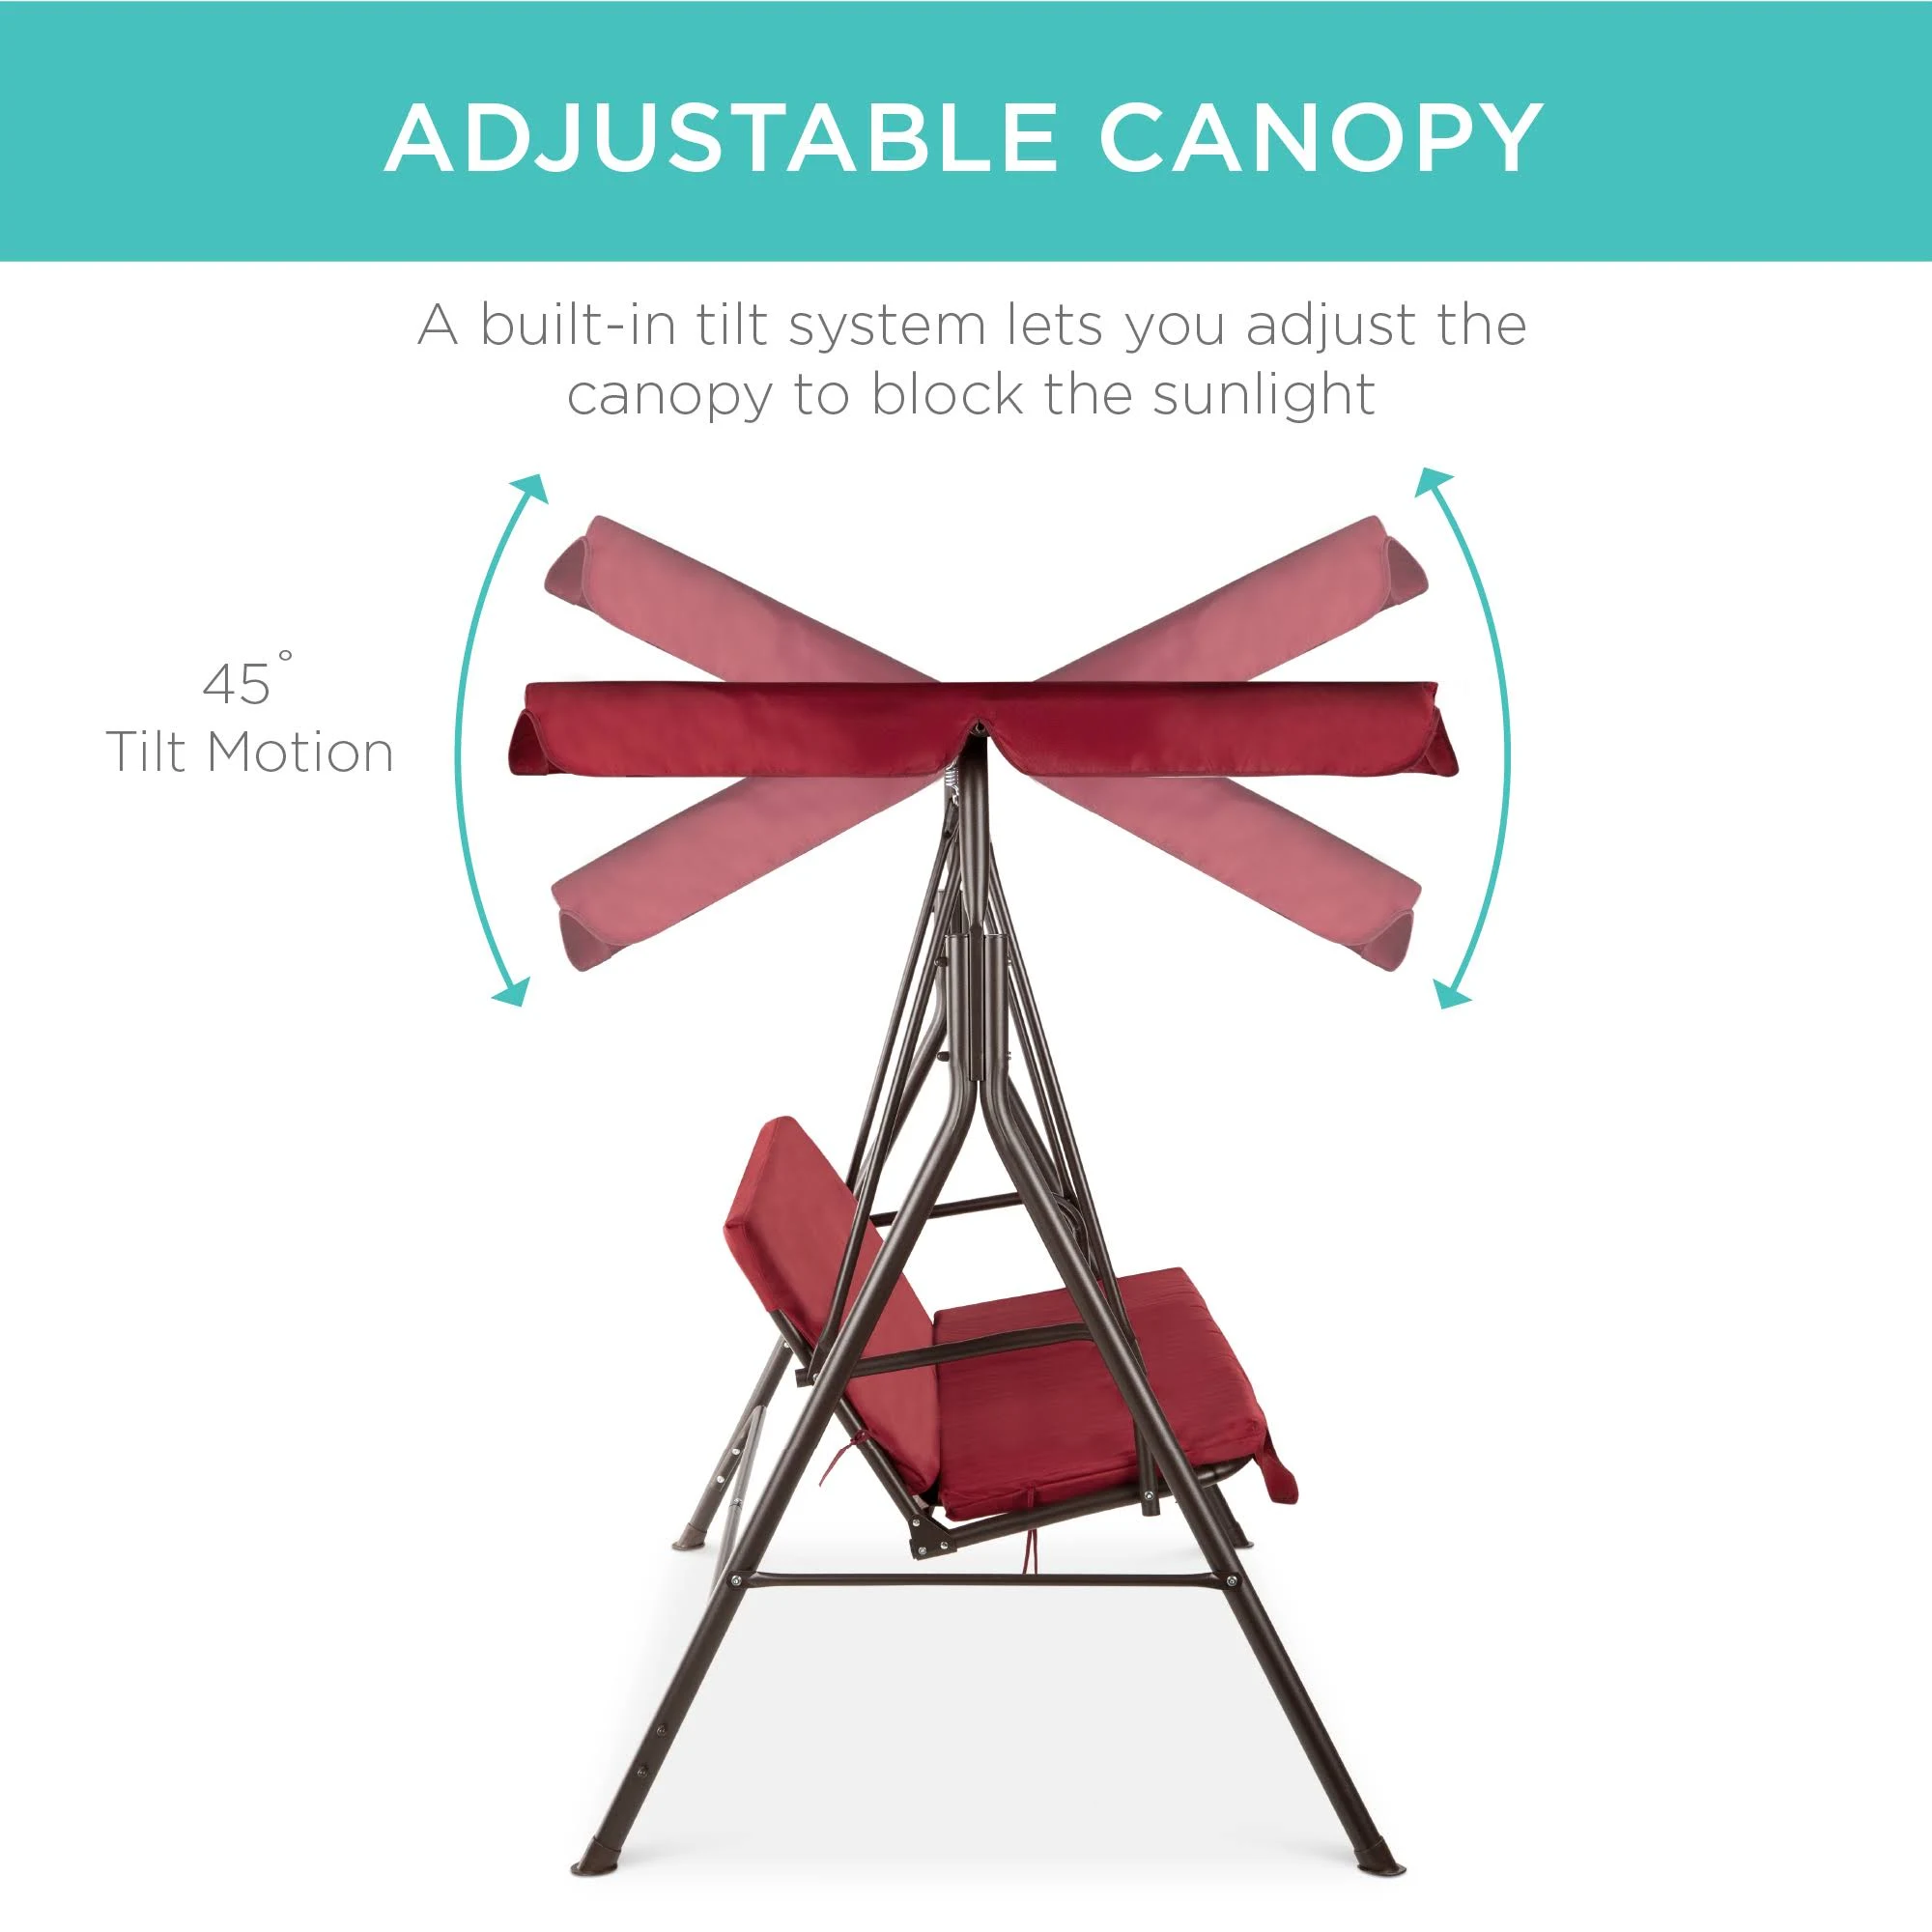 Best Choice Products 2-Person Outdoor Large Convertible Canopy Swing Glider Chair w/Removable Cushions, Burgundy